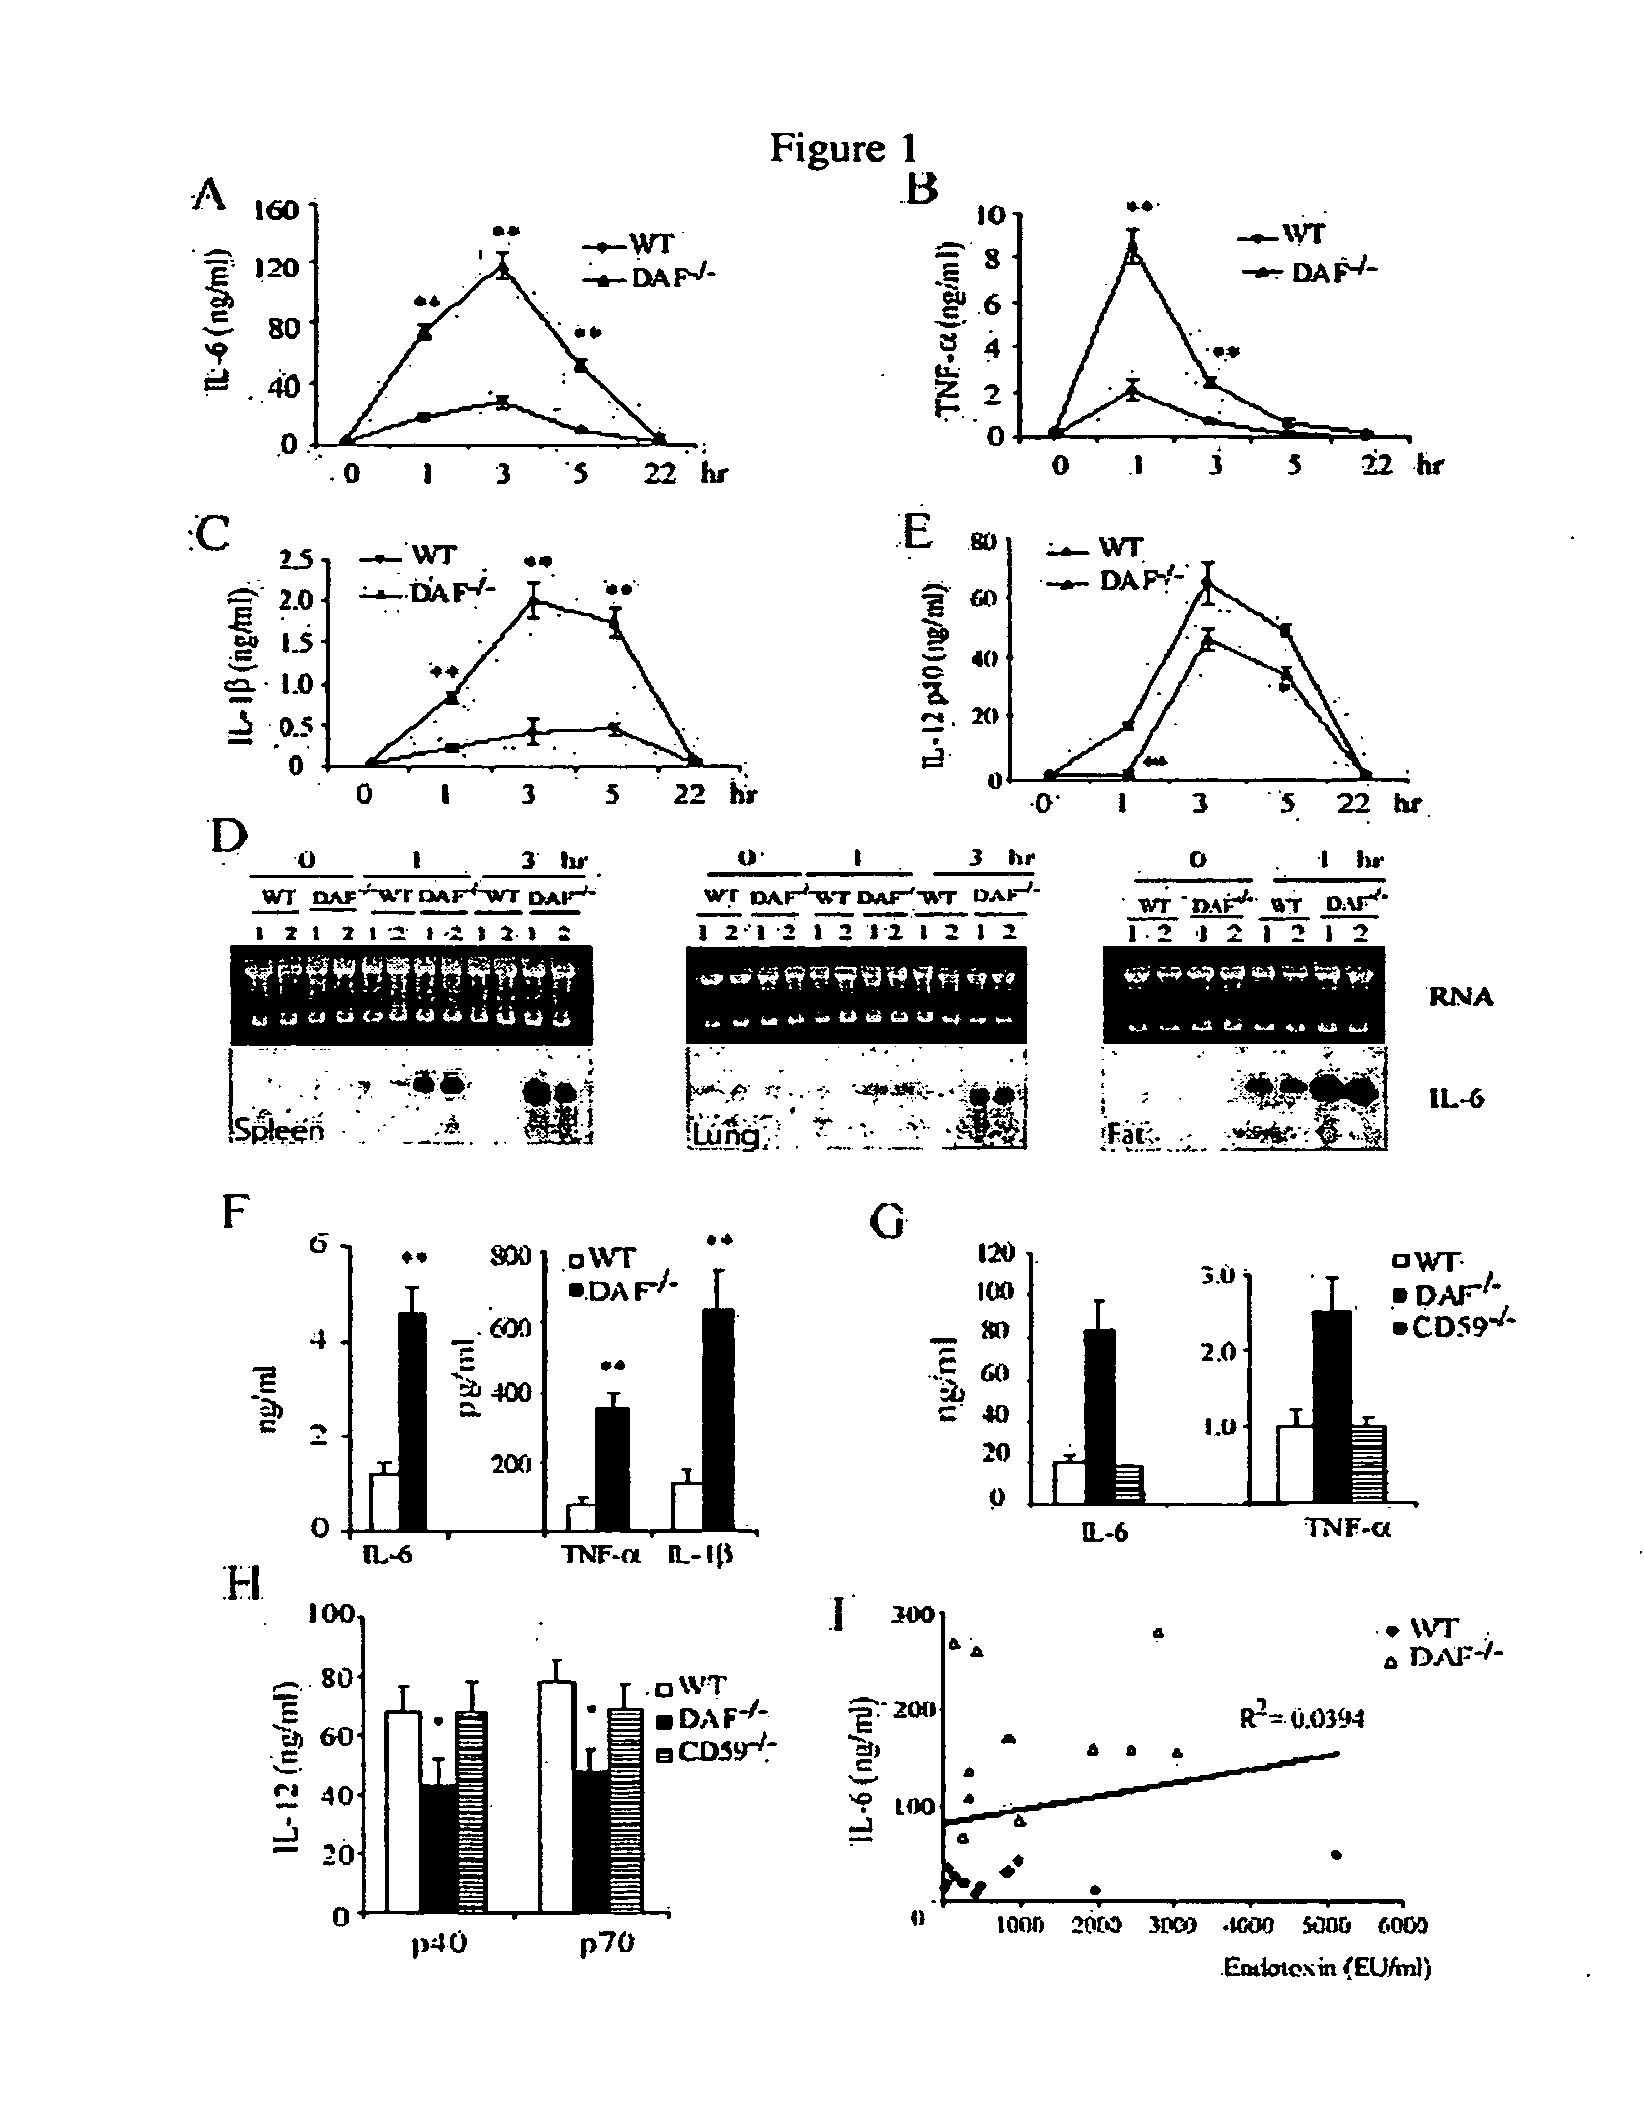 Regulation of TLR Signaling by Complement